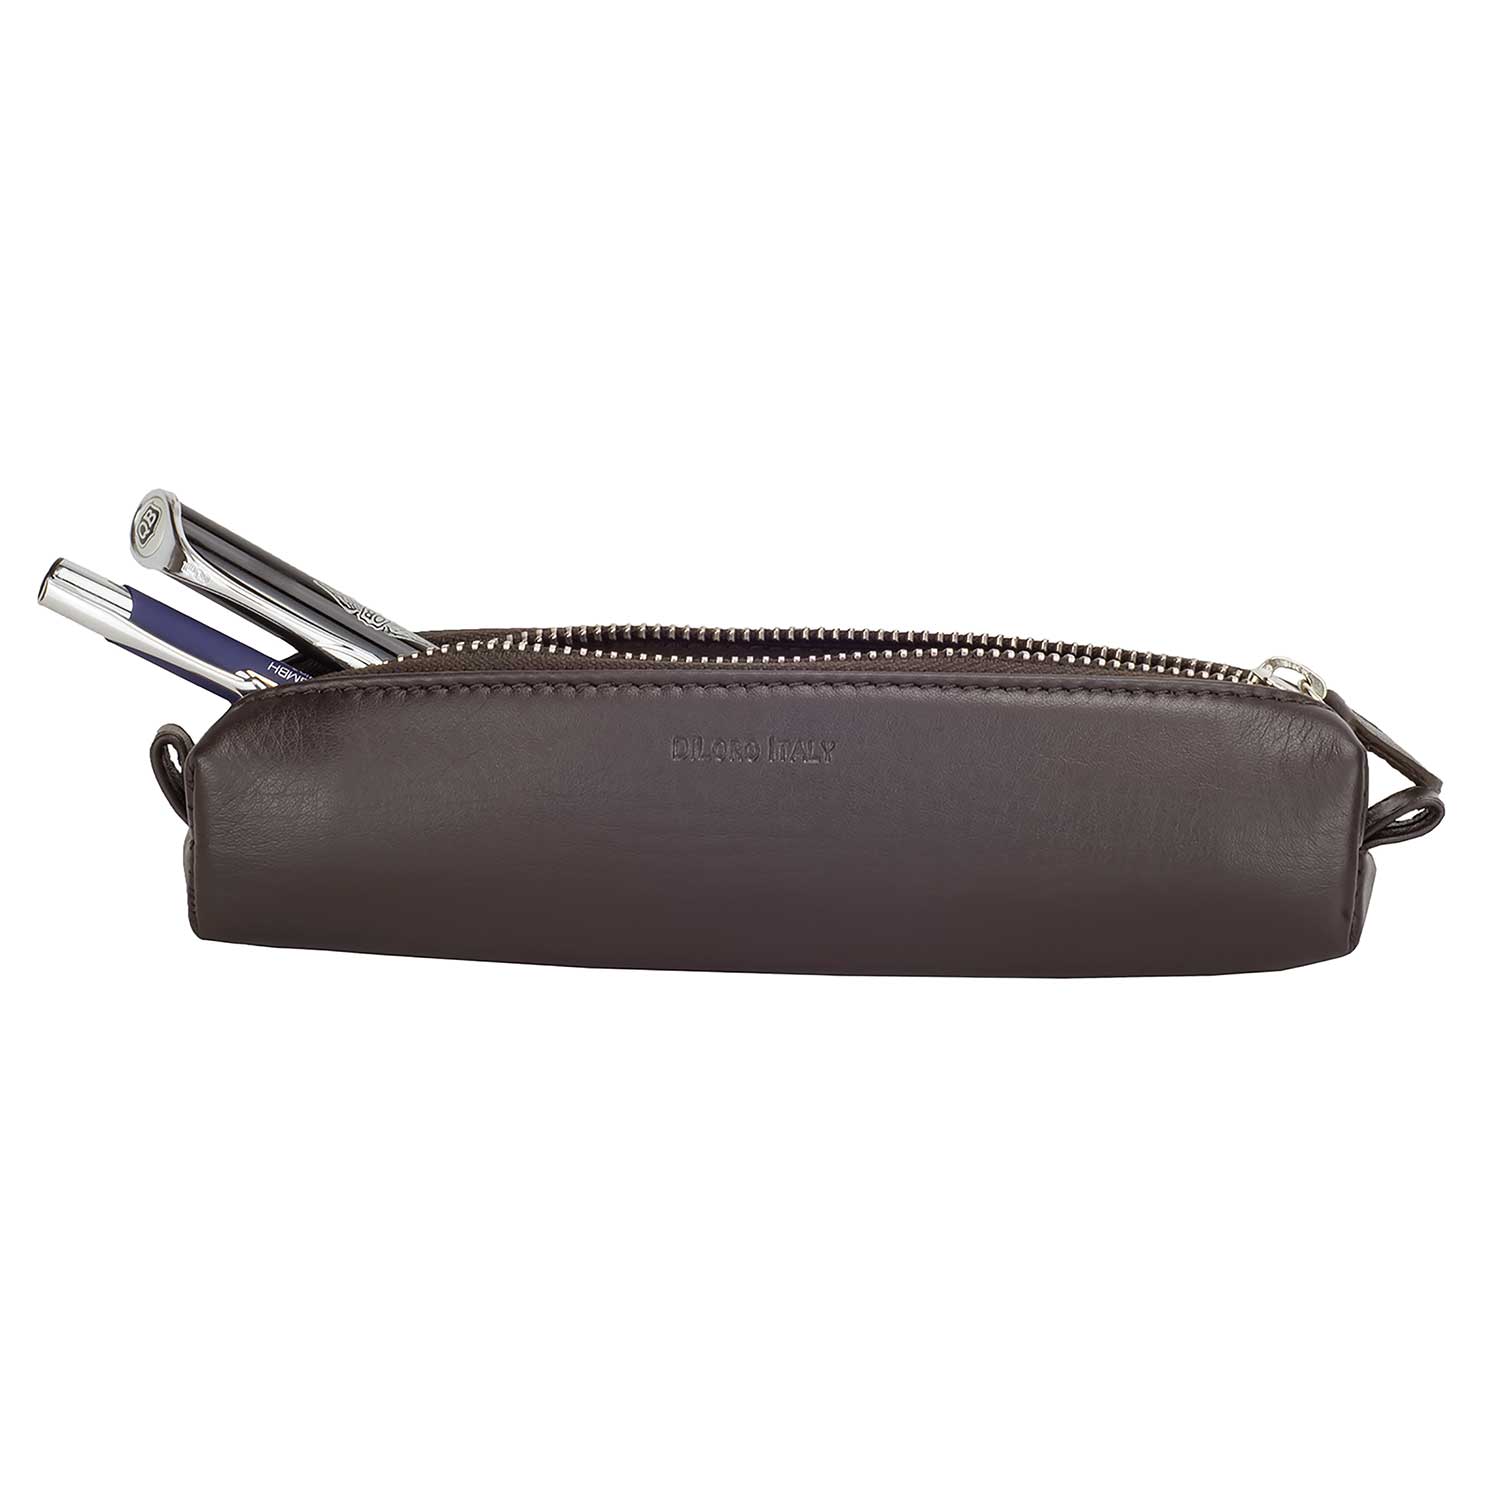 Multi-Purpose Zippered Leather Pen Pencil Case Pouch in Dark Brown (pens not included)